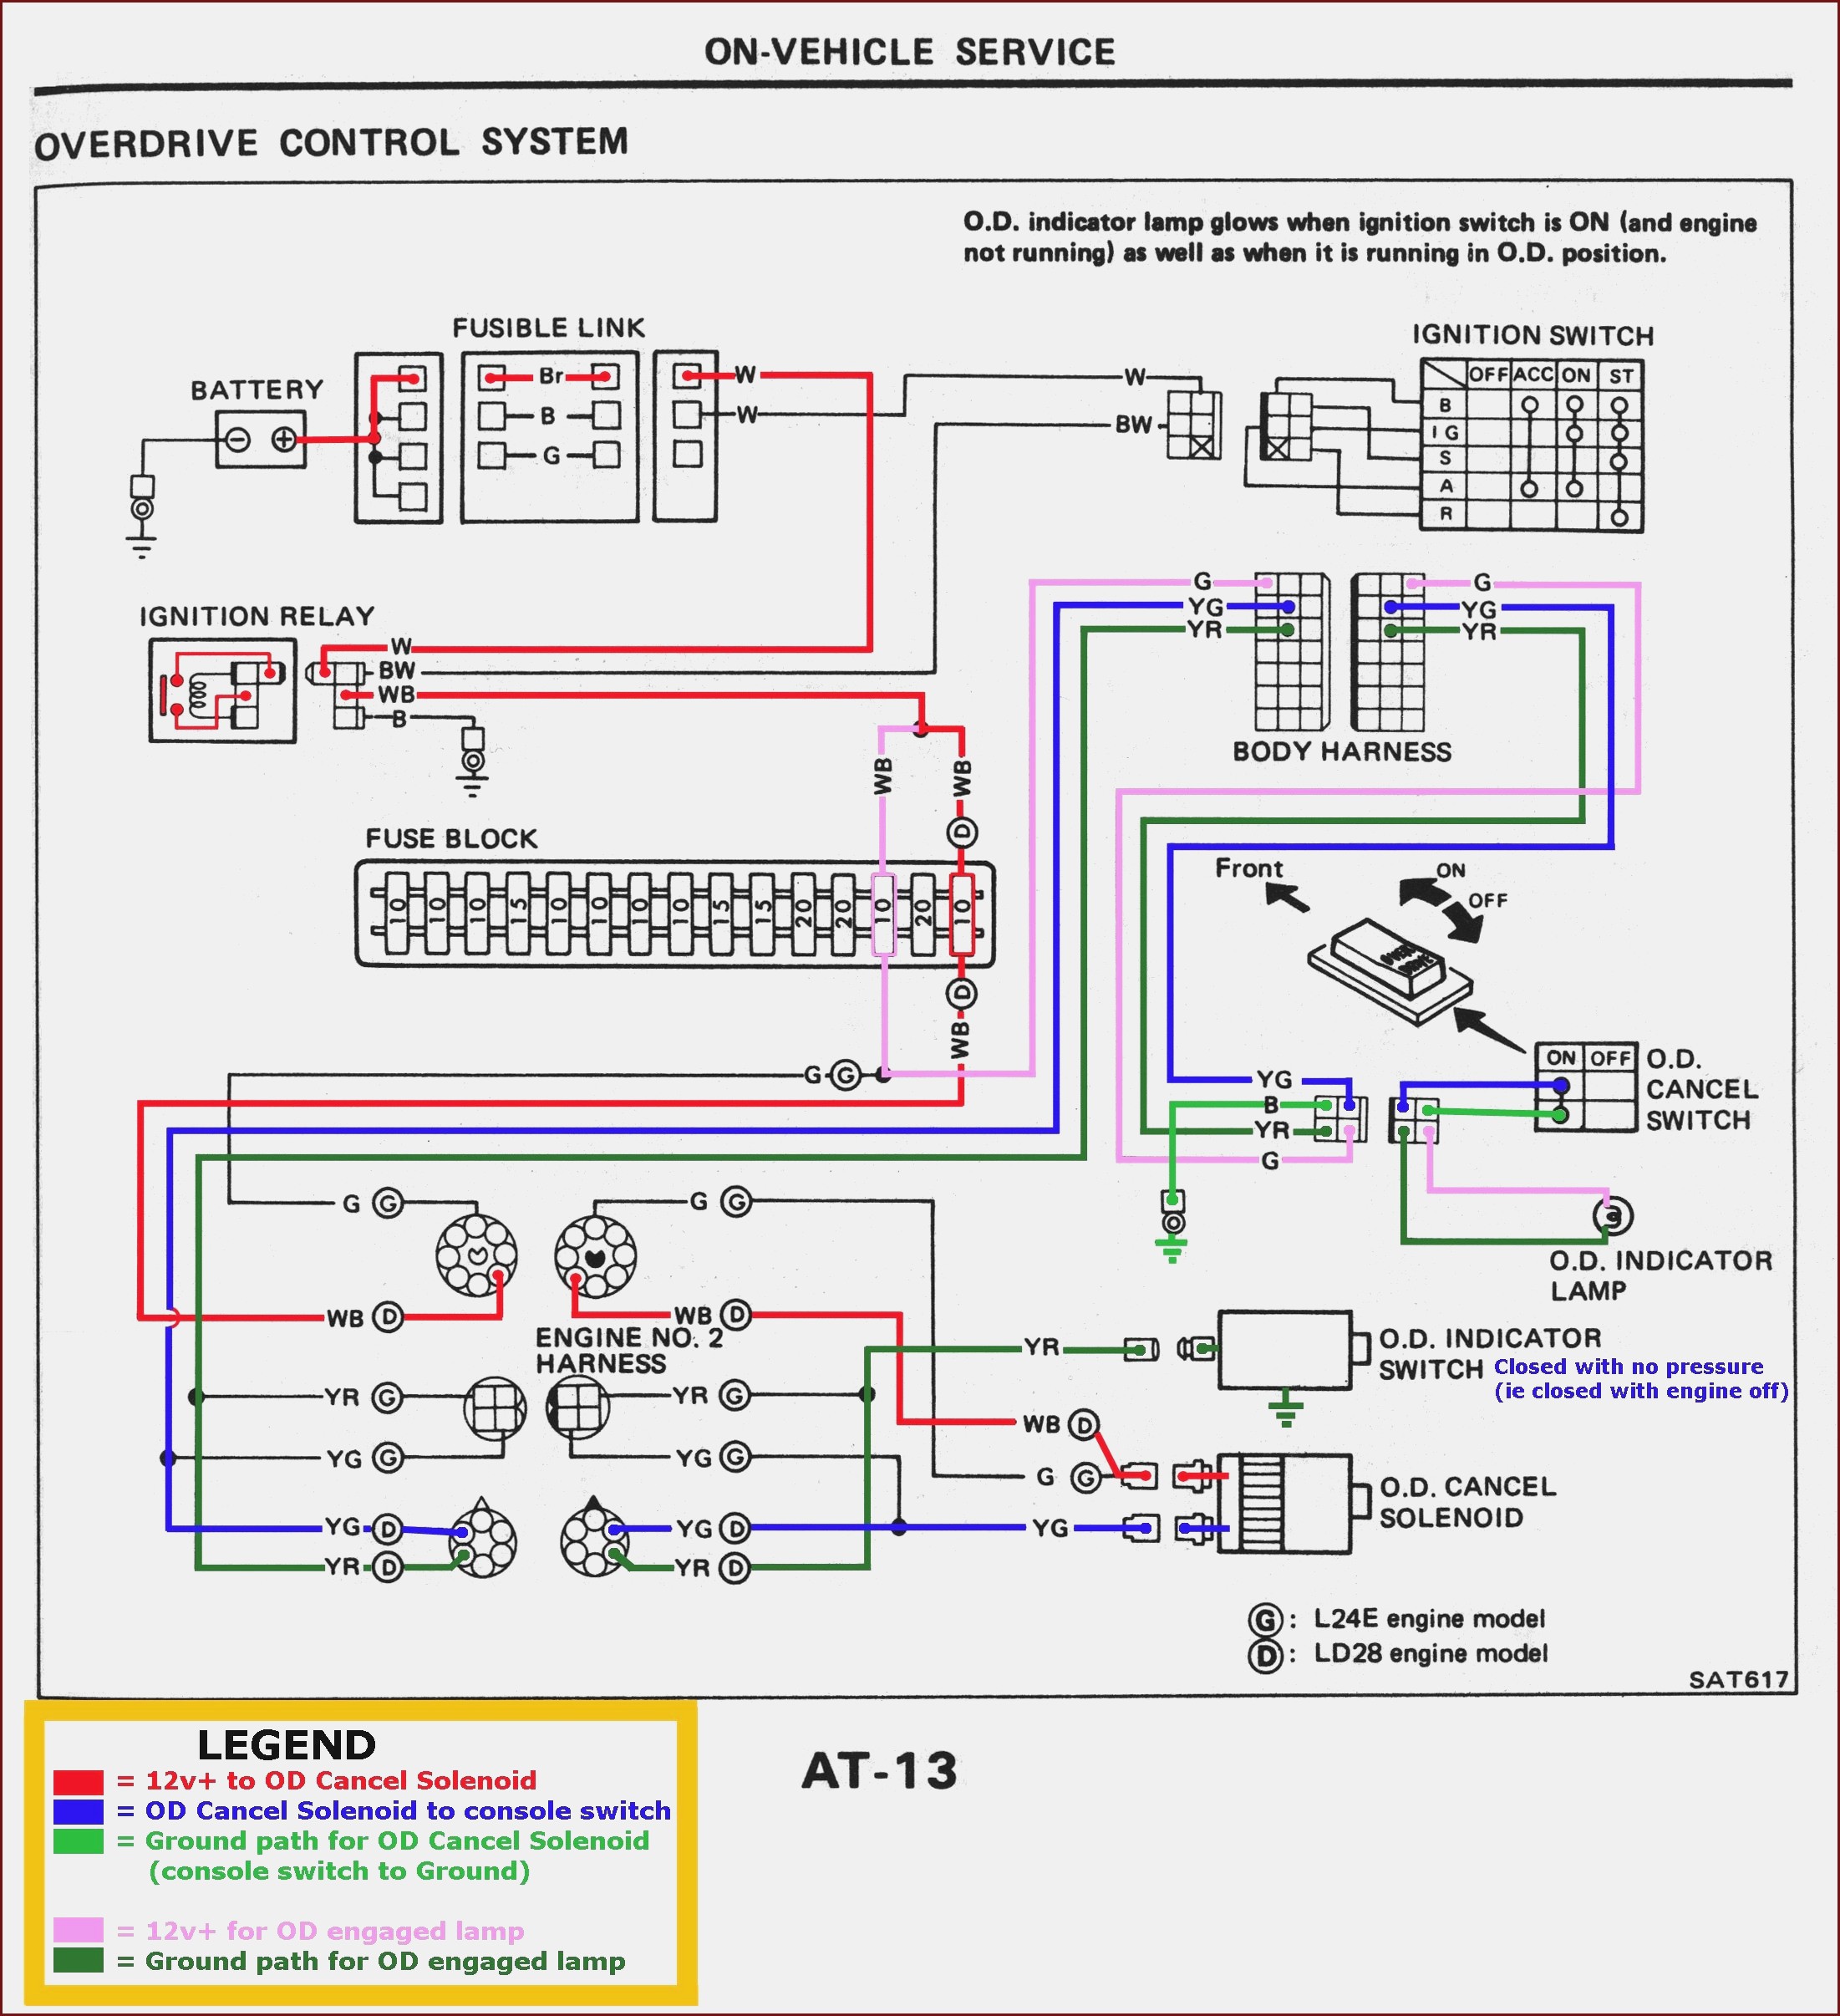 Ls1 Engine Wiring Diagram Ls1 Engine Wiring Harness Diagram the Image to